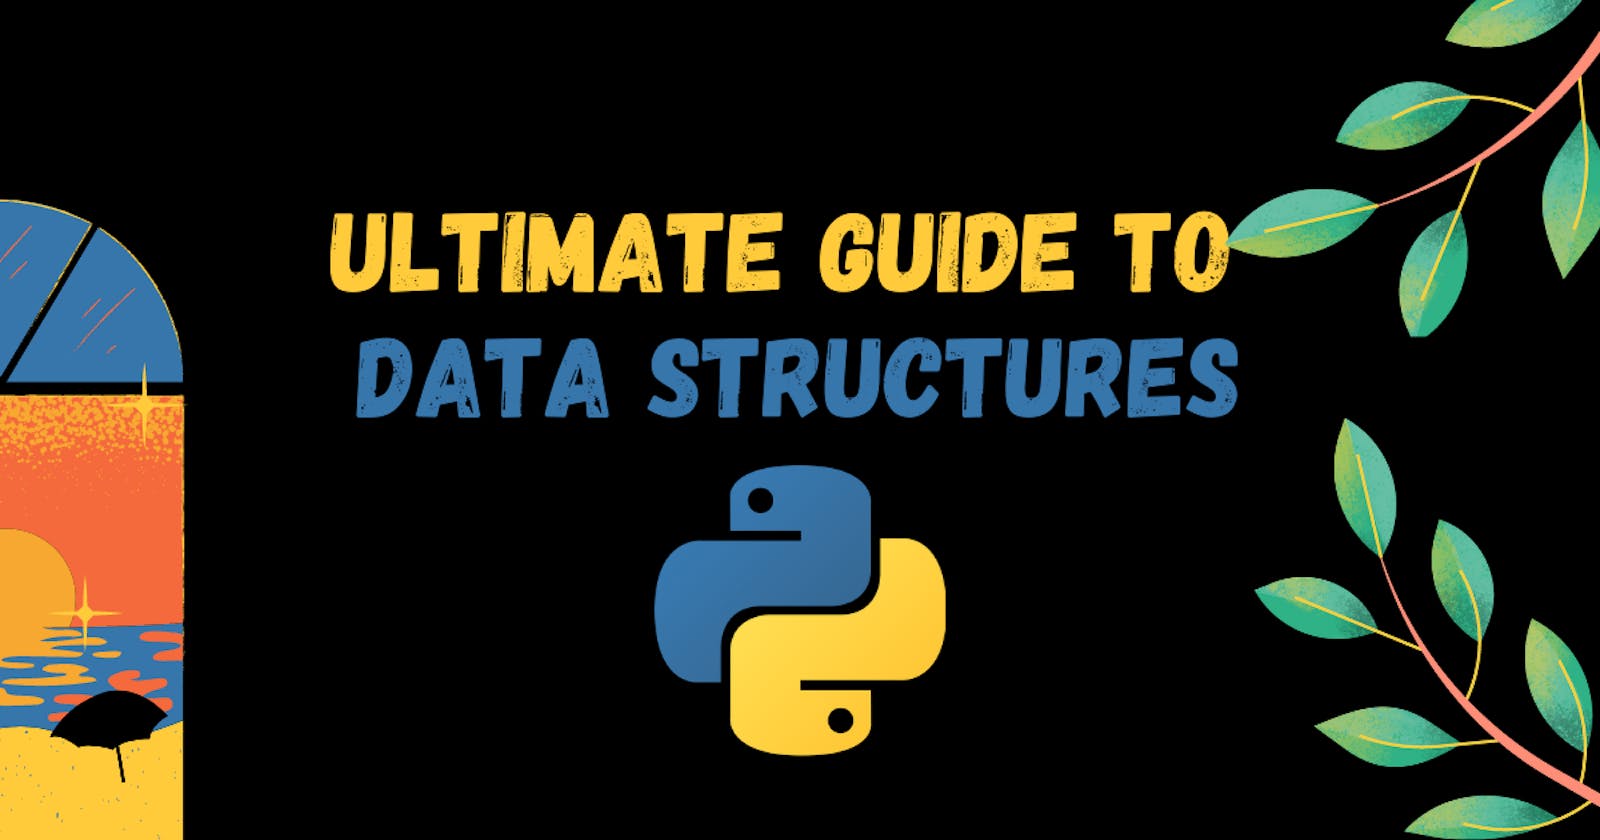 An Ultimate Guide to Algorithms and Data Structures